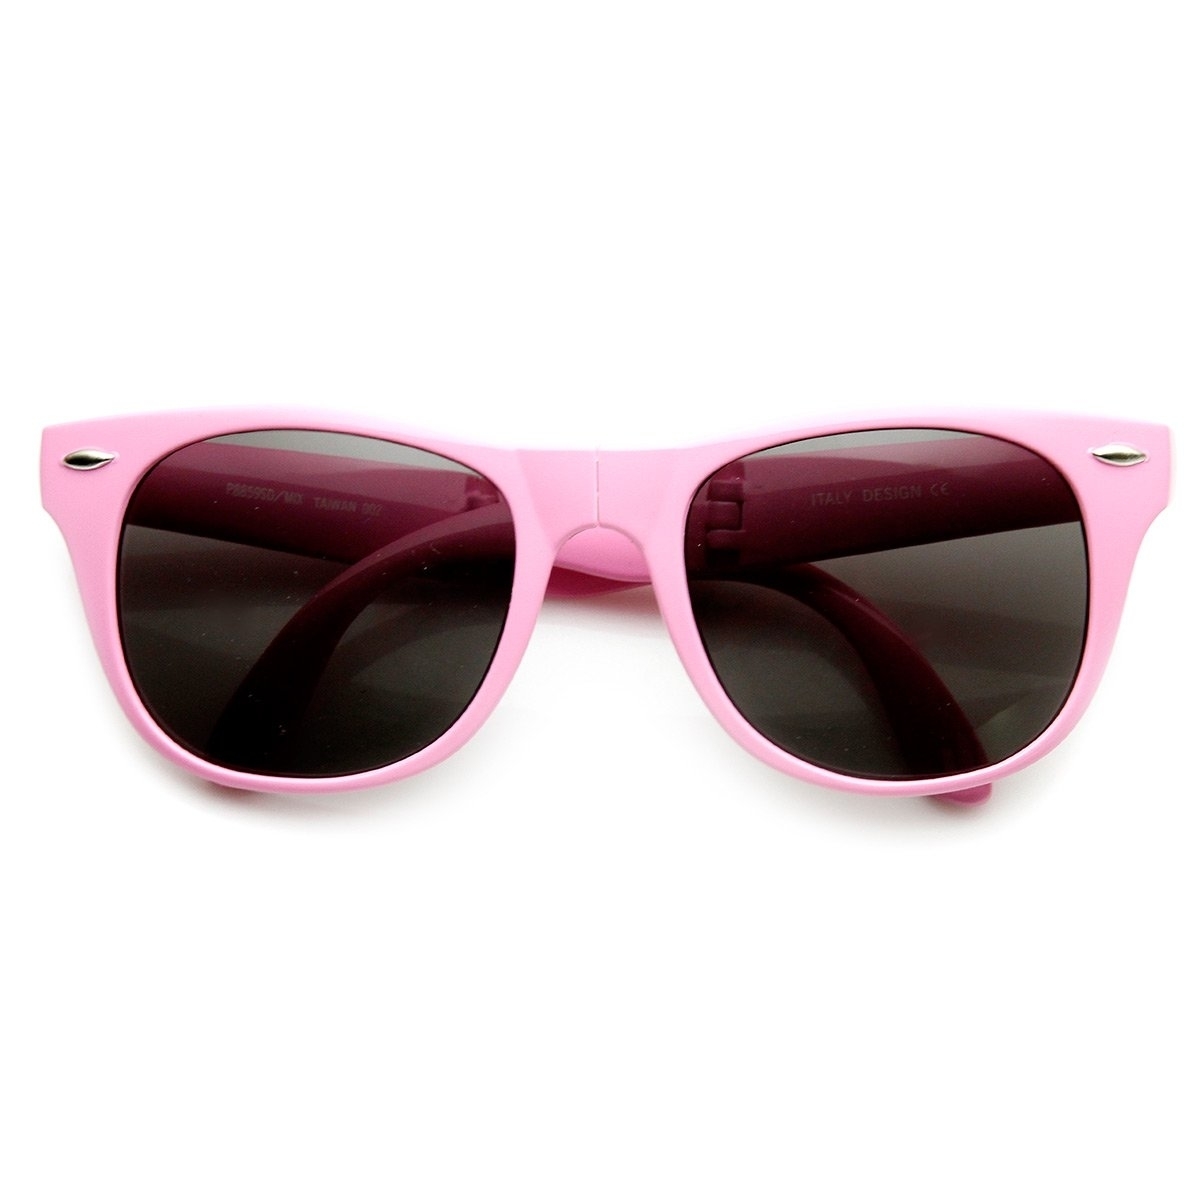 Neon Bright Colorful Compact Folding Pocket Horn Rimmed Sunglasses 54mm - Hot-Pink Smoke